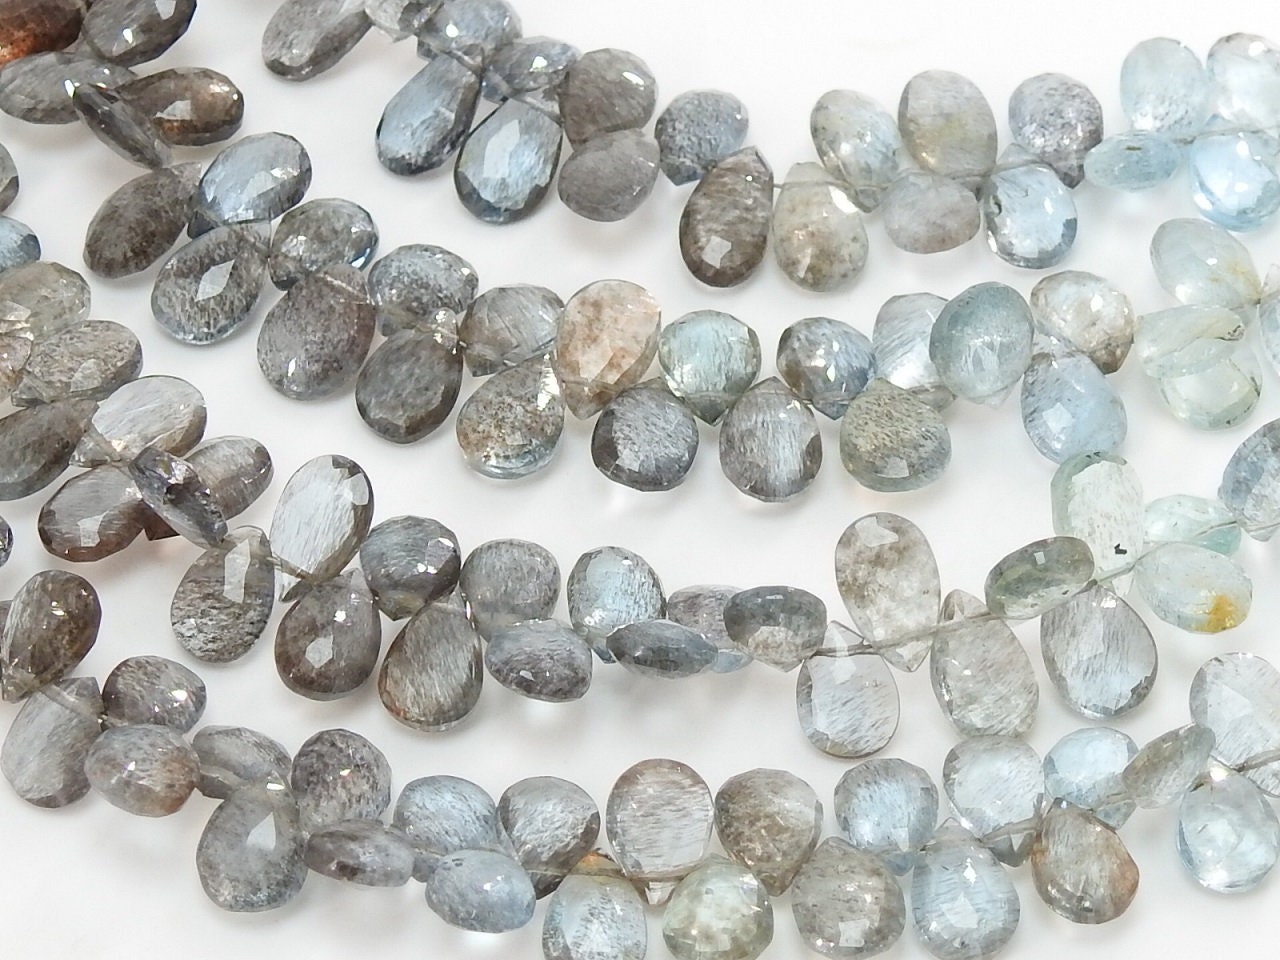 Moss Aquamarine Faceted Teardrop,Multi Shaded,Loose Bead 8Inch 9X6To8X5MM Approx Wholesale Price,New Arrival,100%Natural BB(BR4) | Save 33% - Rajasthan Living 14